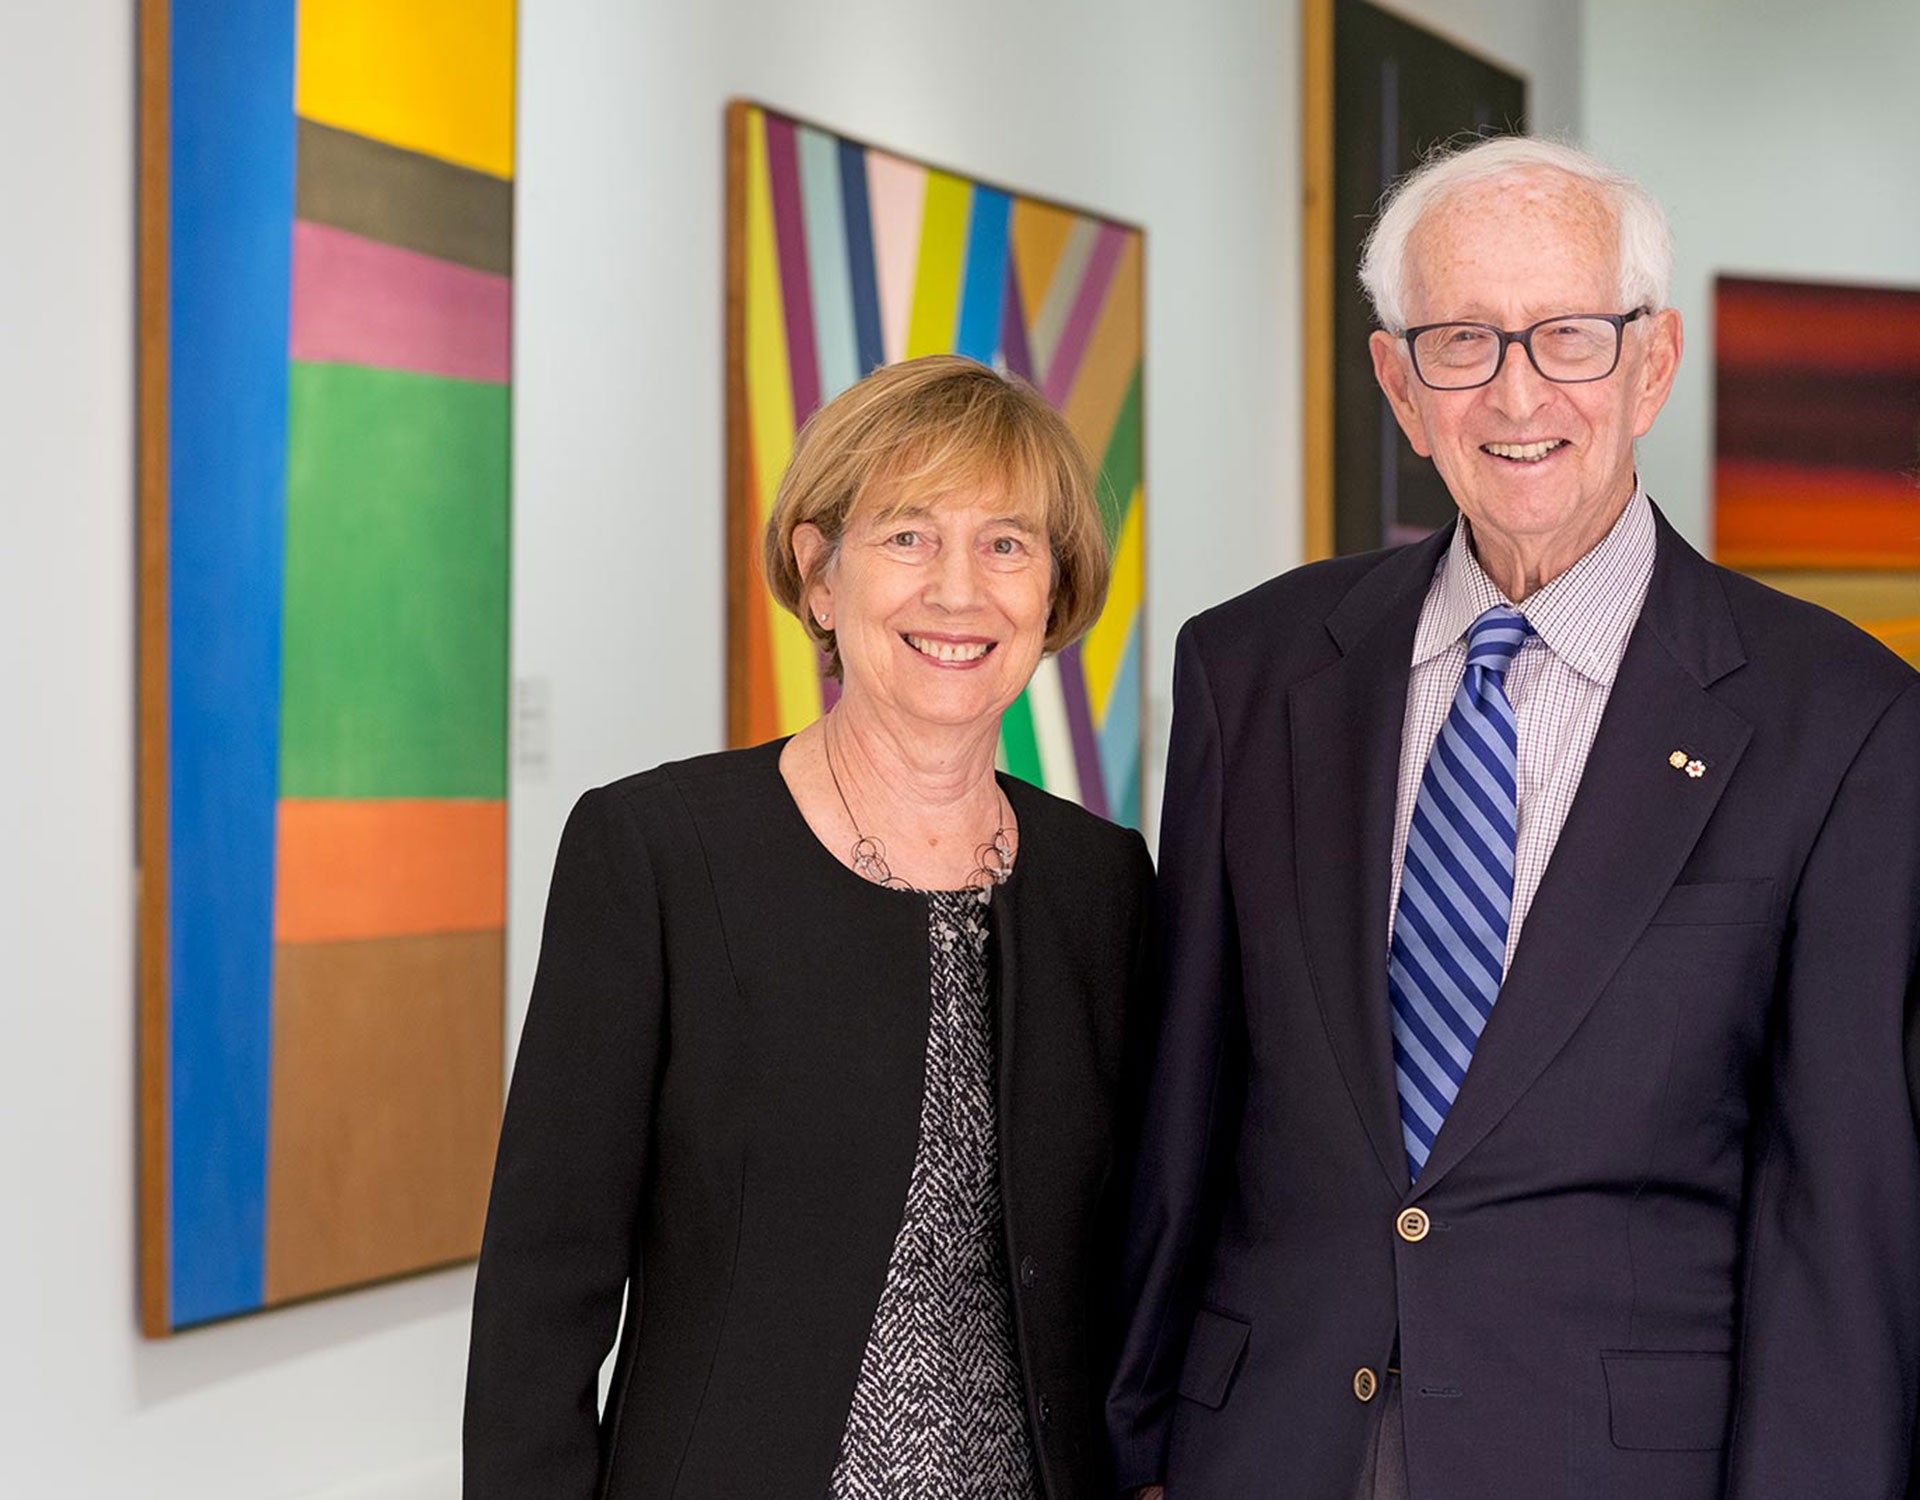 Founder of the Jarislowsky Institute, Stephen A. Jarislowsky and his wife Gail Jarislowsky